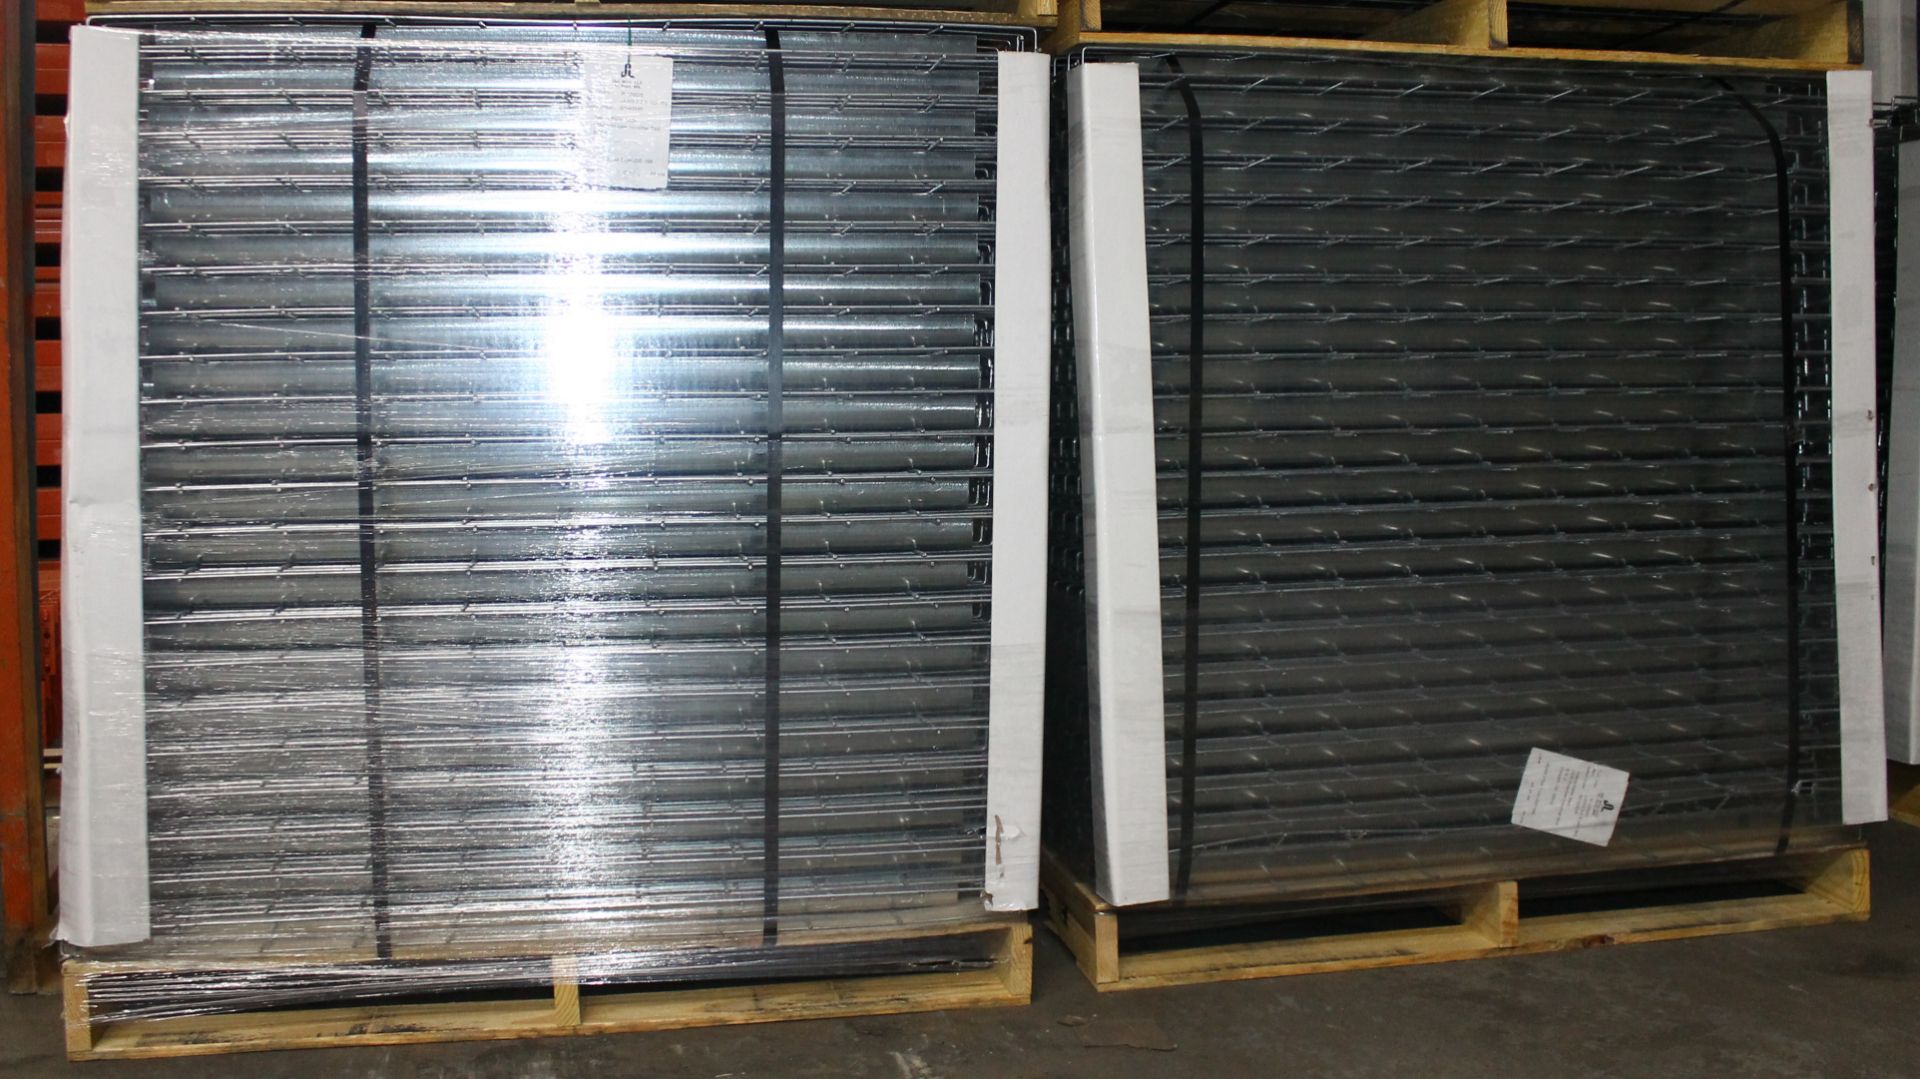 NEW 40 PCS OF STANDARD 42" X 53" WIREDECK - 2050 LBS CAPACITY - Image 2 of 2